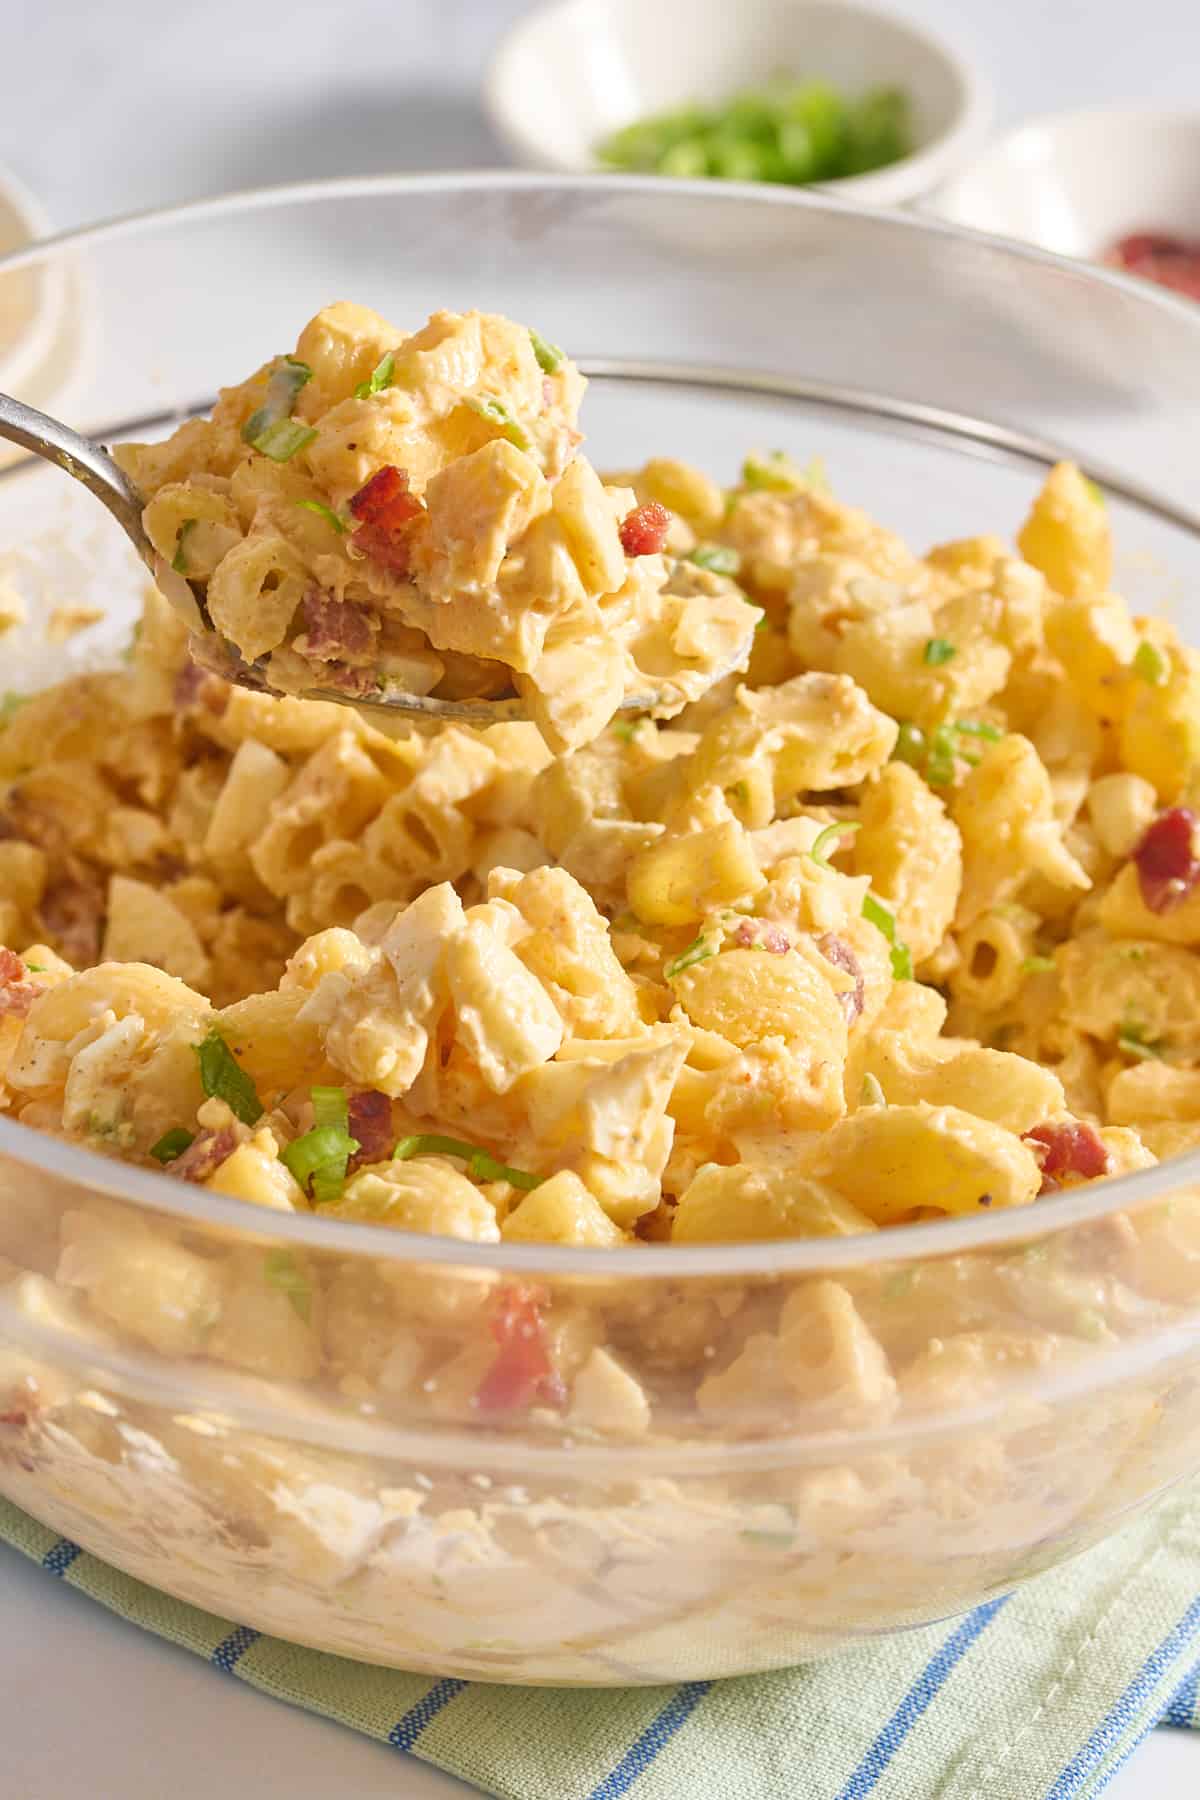 Close-up image of deviled egg, pasta, salad served in a large glass bowl, with a spoonful of the pasta salad.